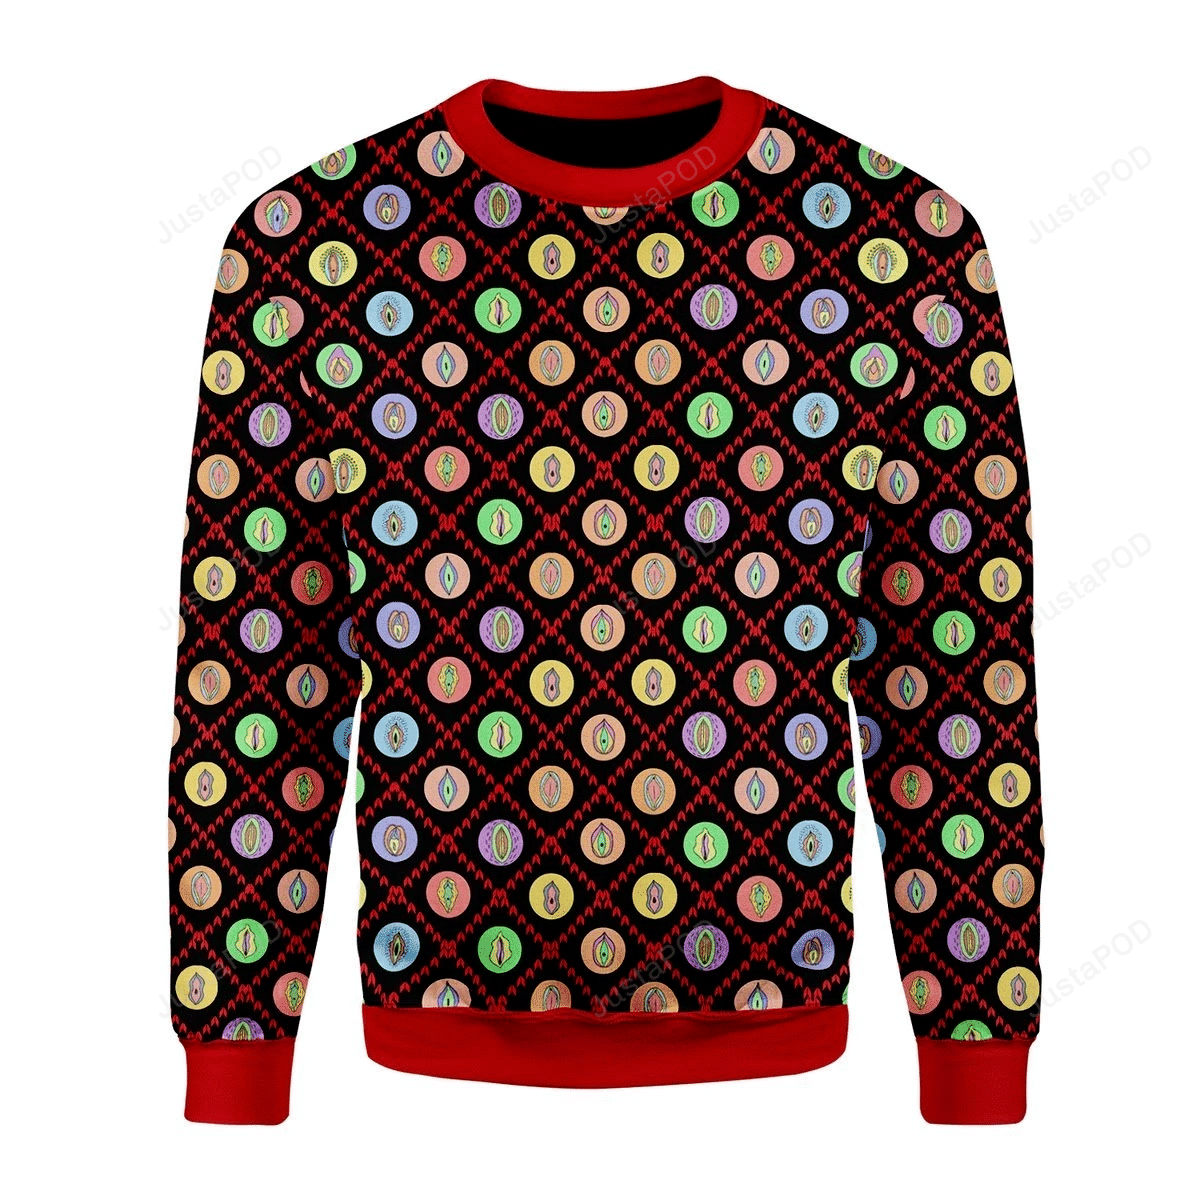 Vagina Ugly Christmas Sweater All Over Print Sweatshirt Ugly Sweater